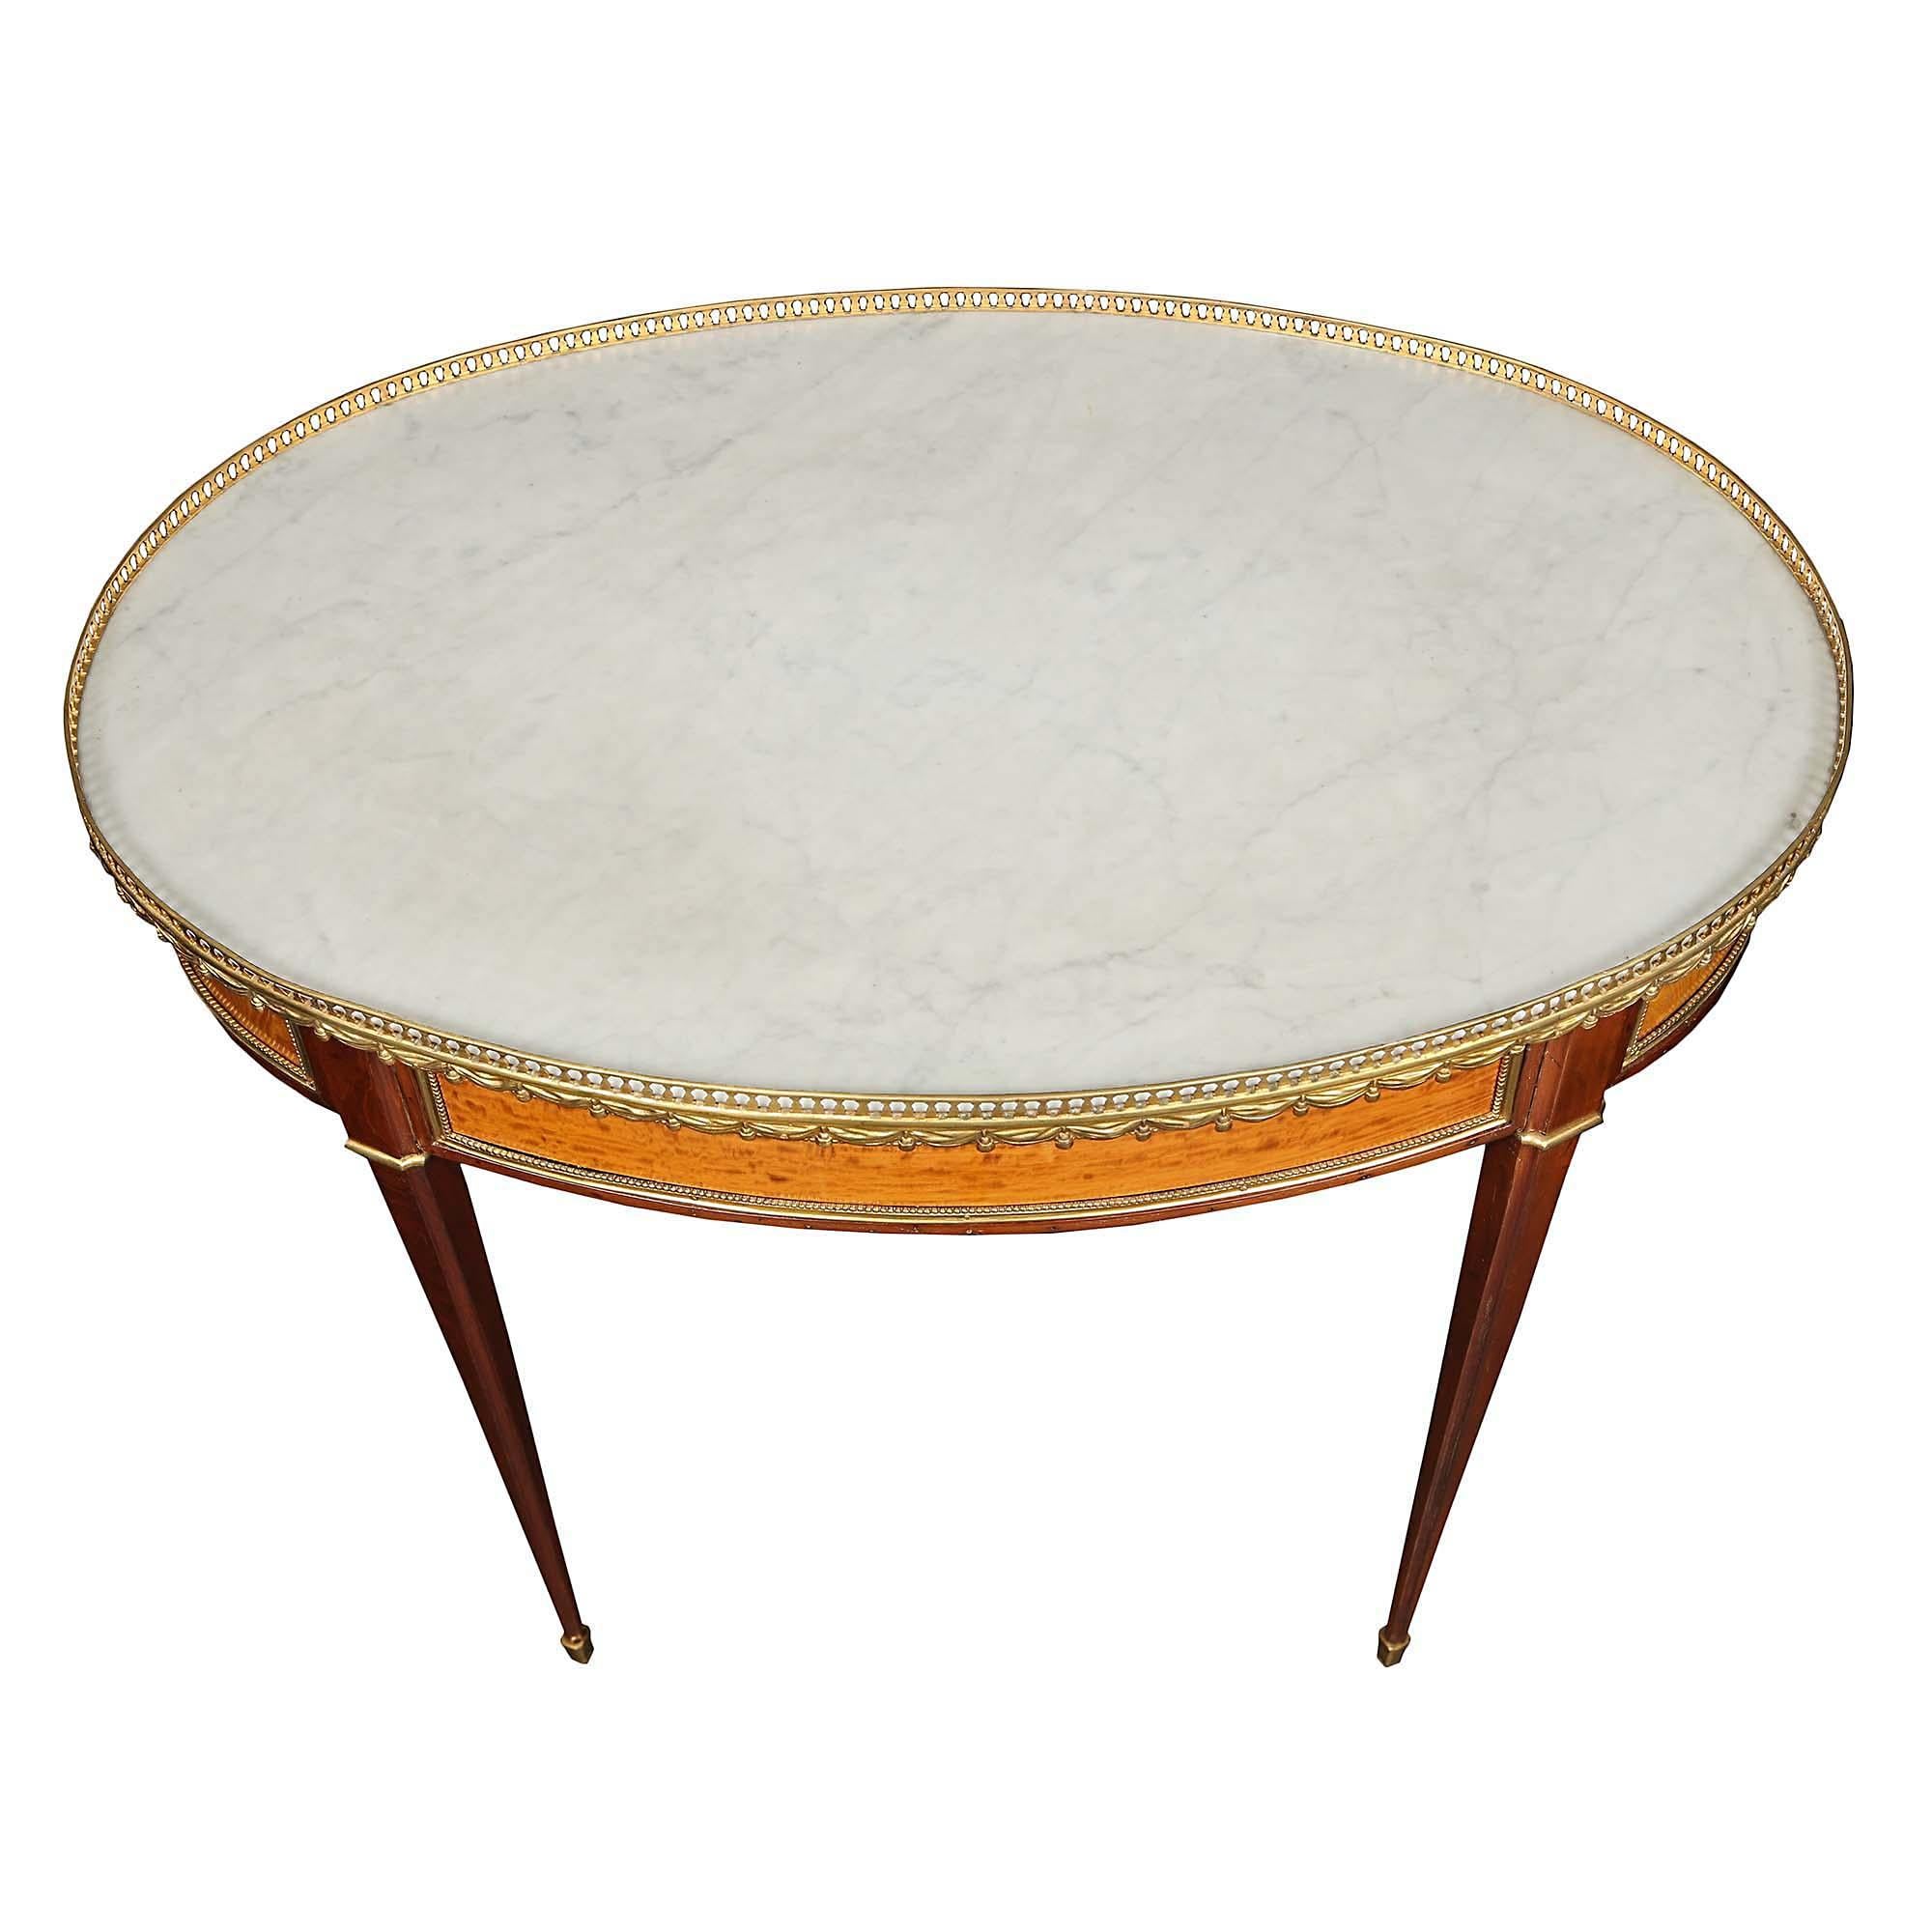 A very elegant French mid 19th century Louis XVI st. mahogany and satinwood oval side table. The table is raised by tapered legs with ormolu sabots and top bands. The satinwood paneled frieze is bordered by a beaded ormolu trim. All below a white